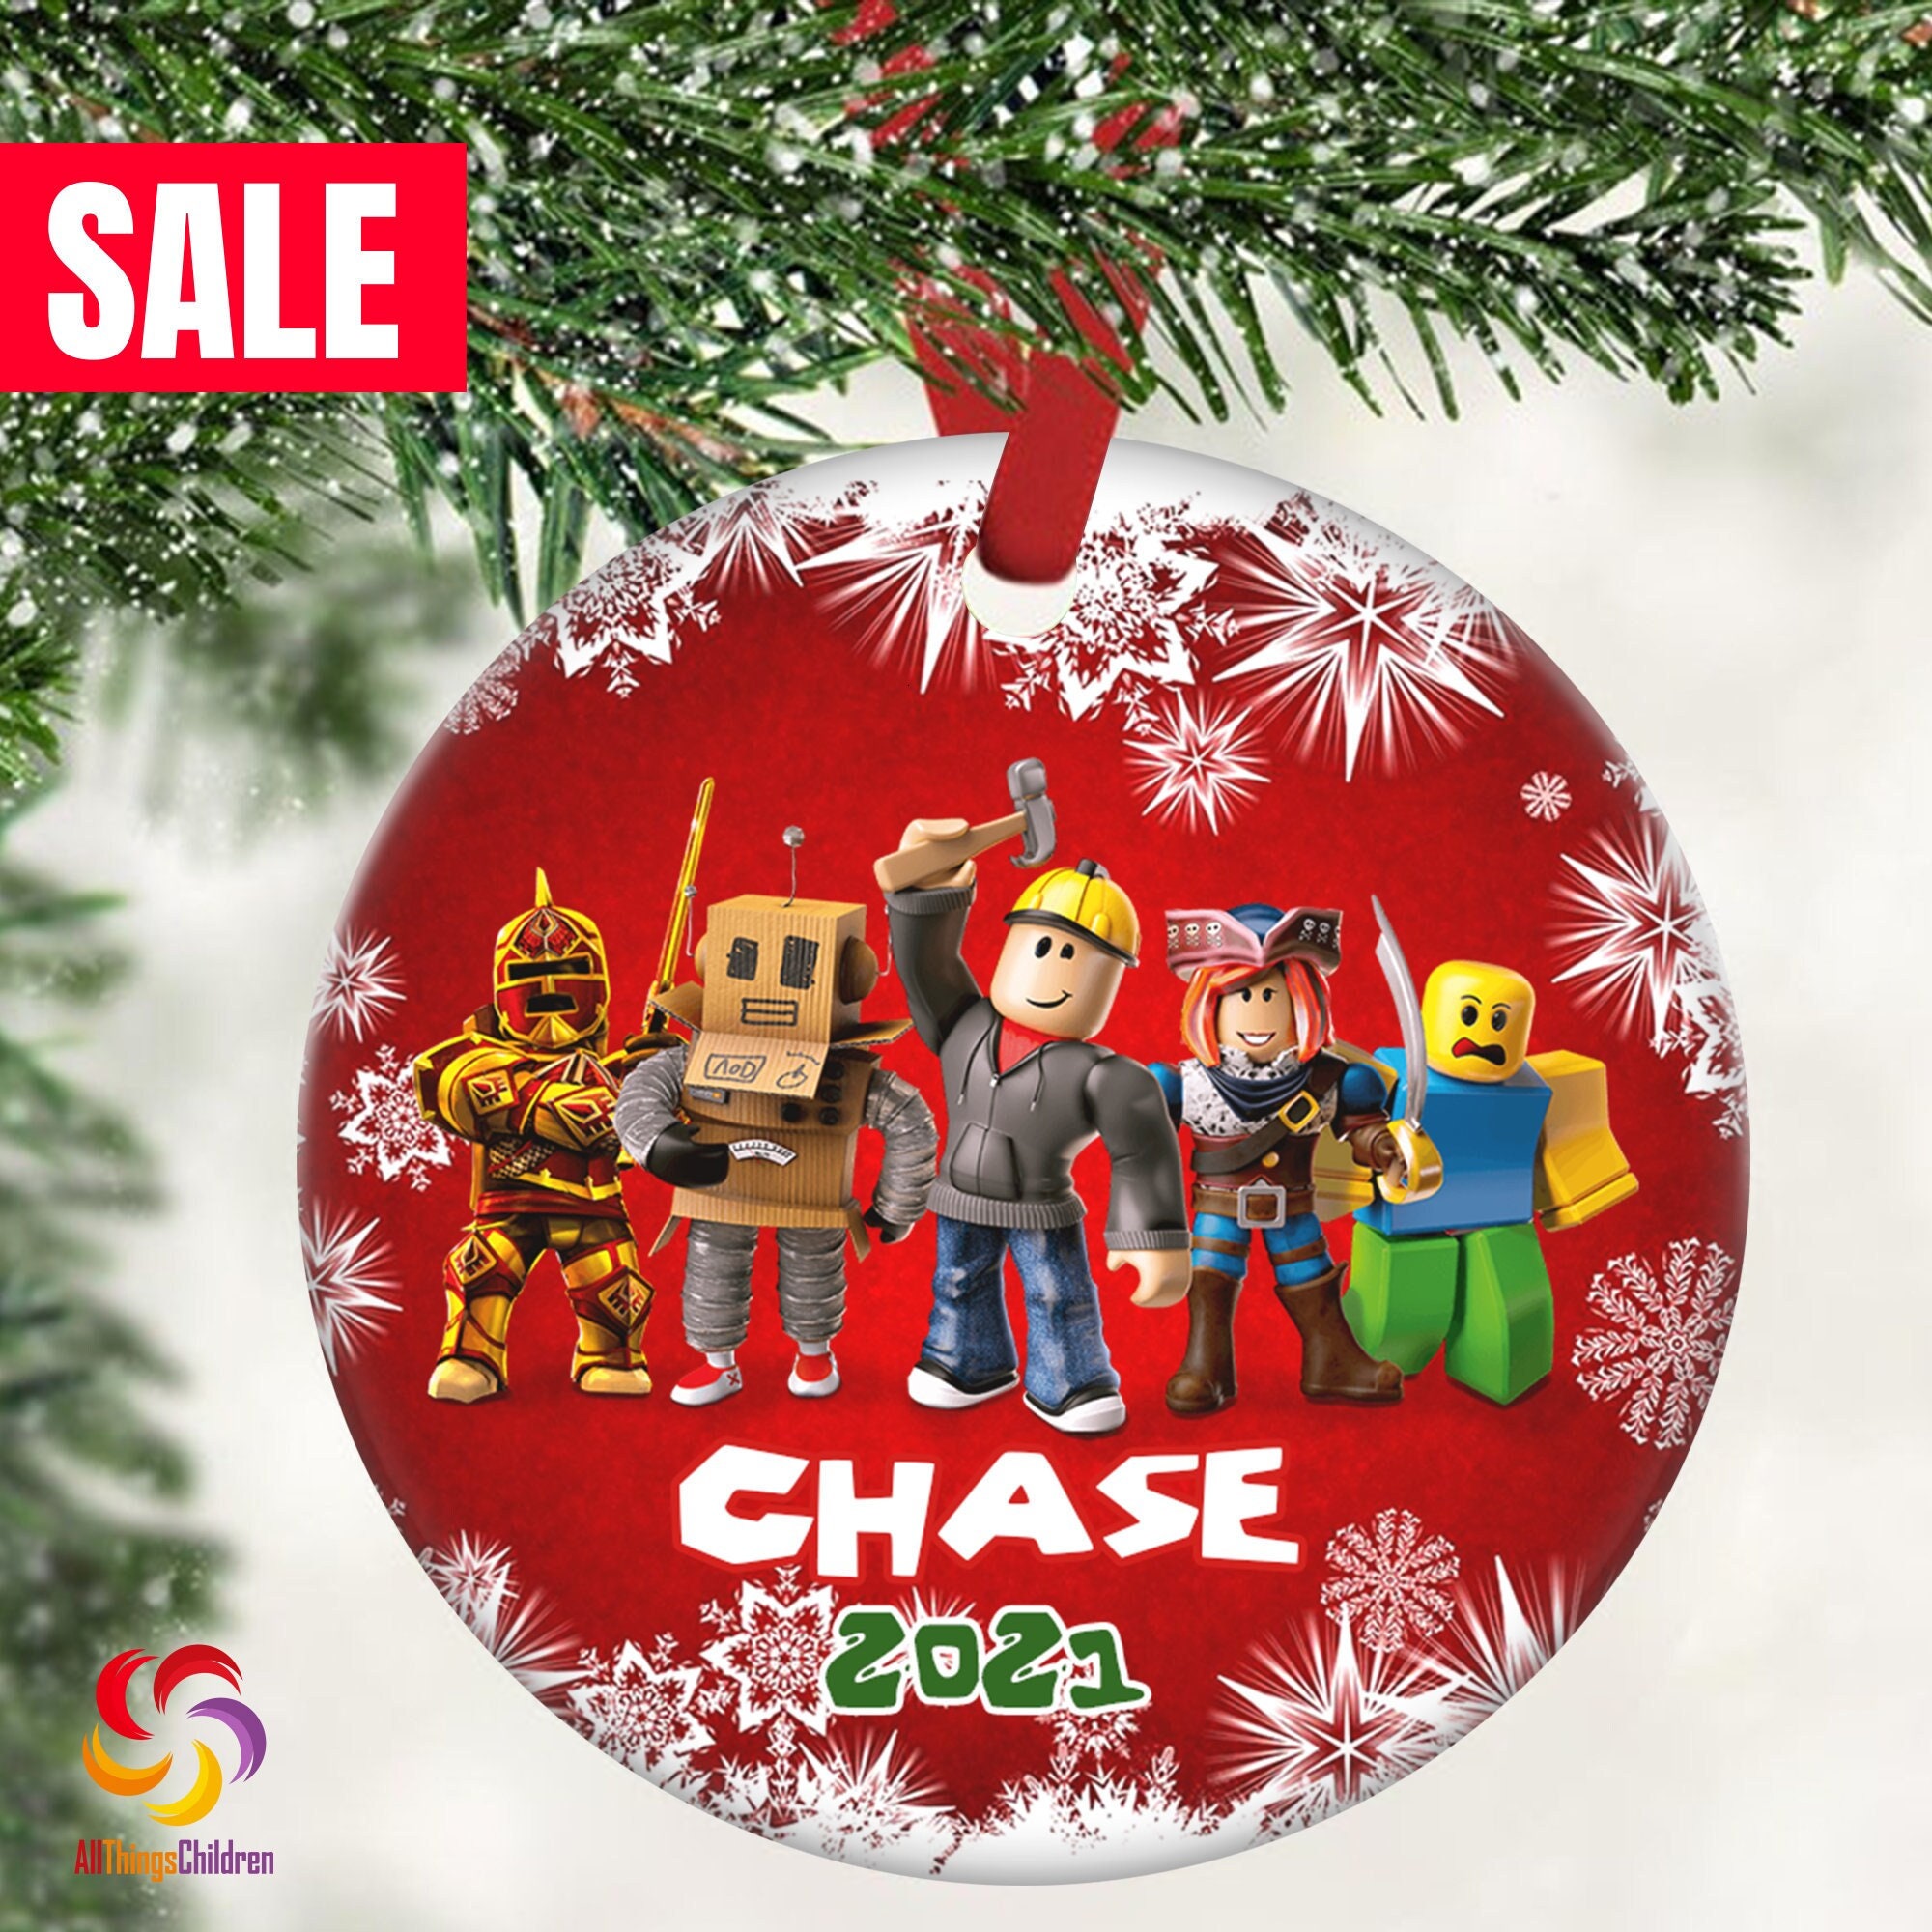 Roblox Game On At Christmas Personalized Children's Christmas Card - Red  Heart Print